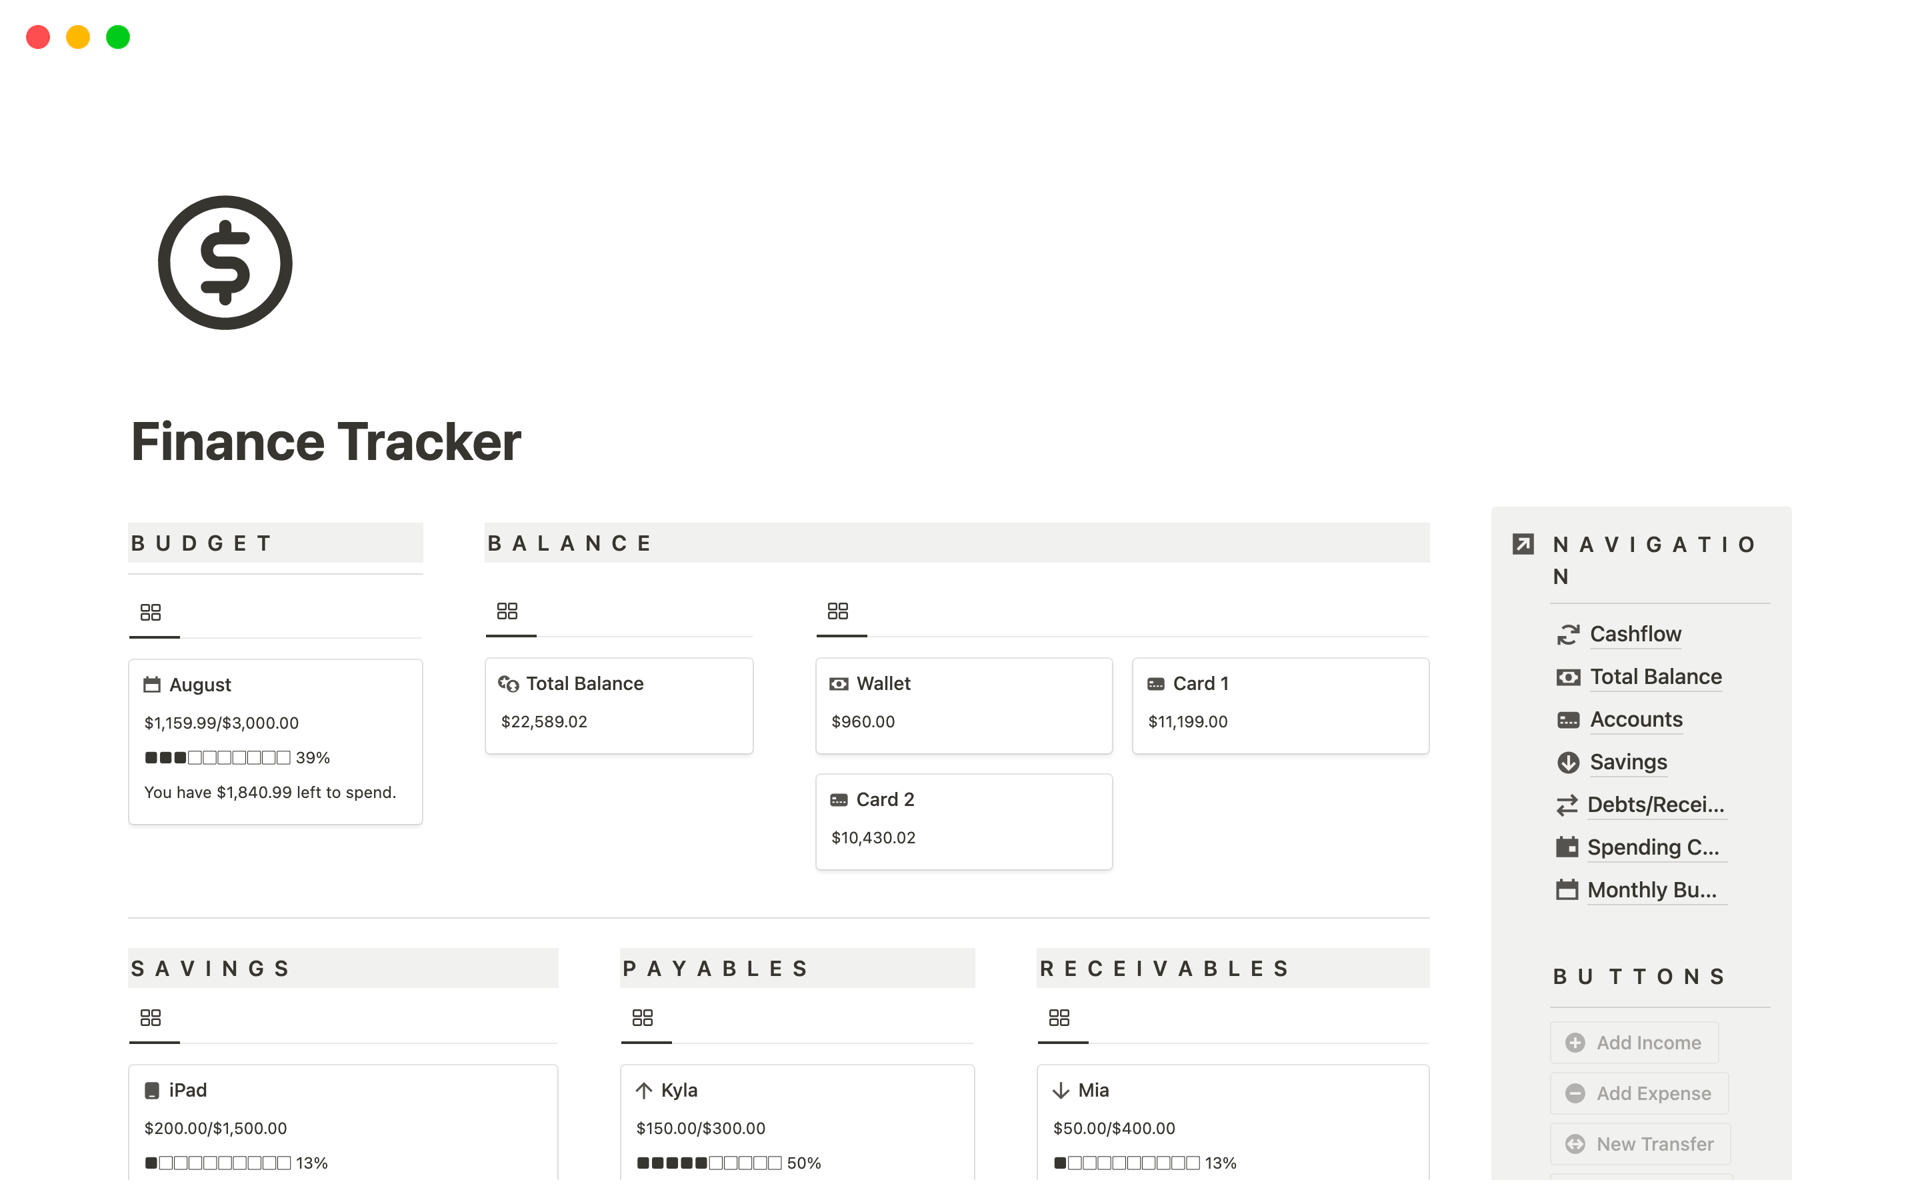 Simplify financial management with the Finance Tracker template, consolidating all data on a single page for effortless control over income, expenses, savings, and more.